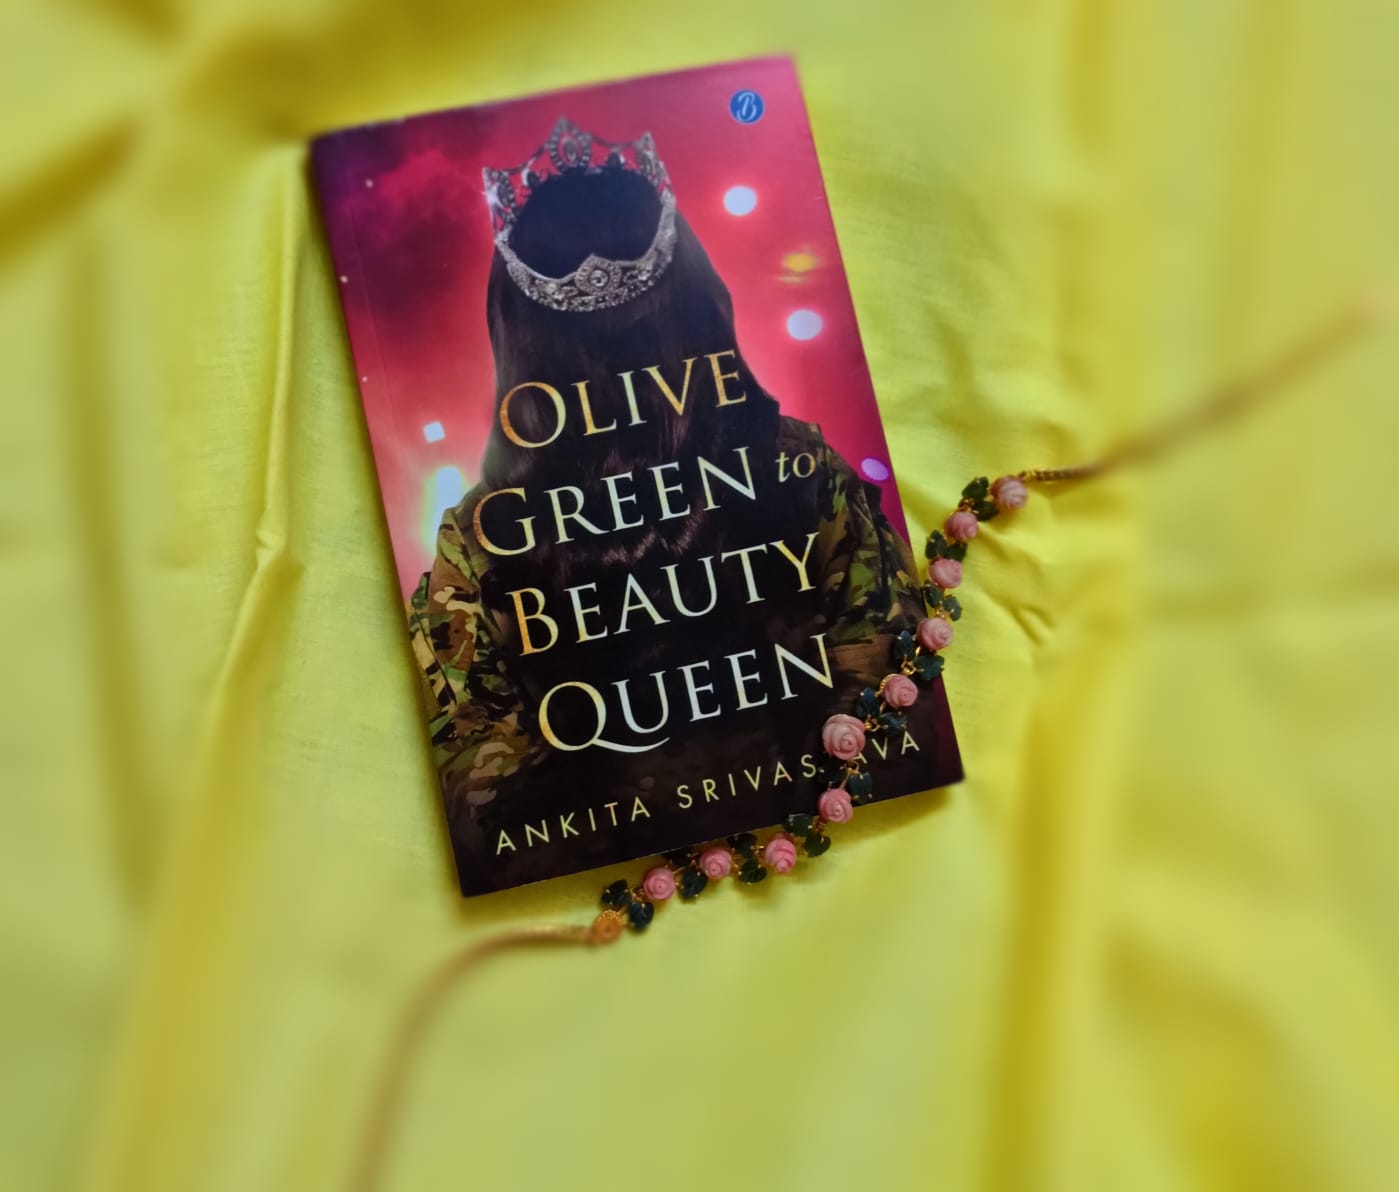 Book Review: From Olive Green to Beauty Queen